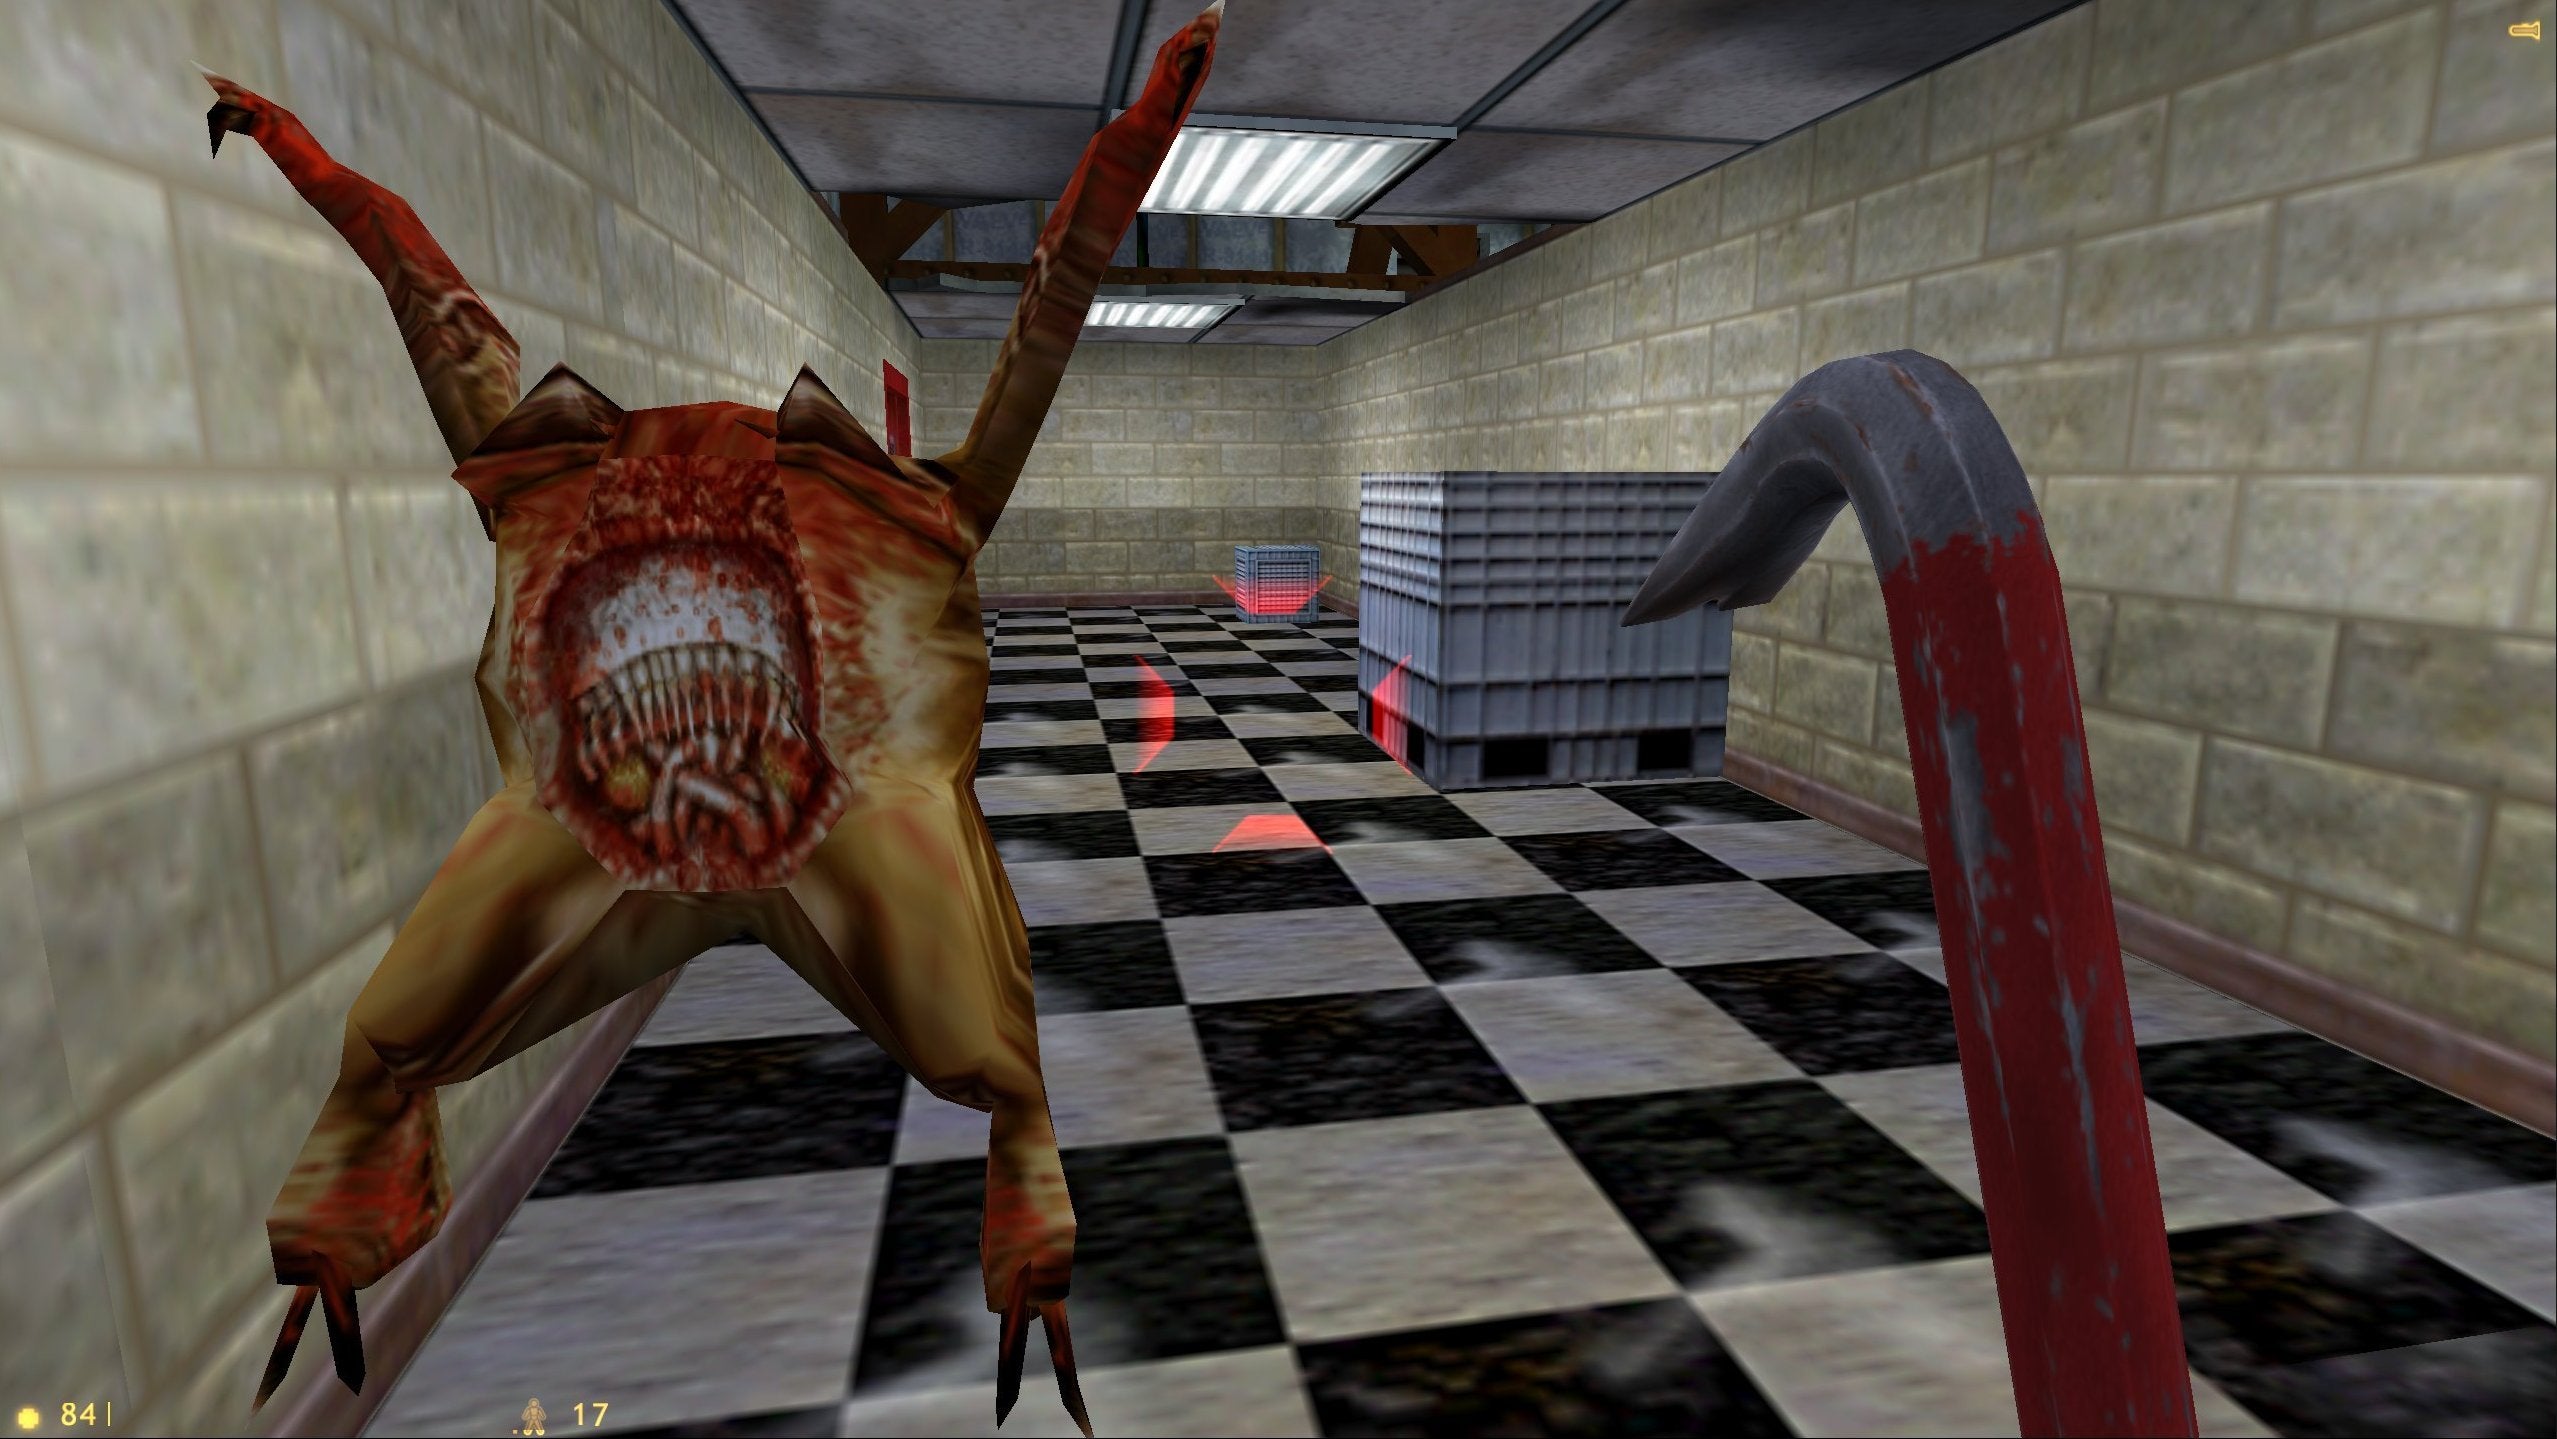 Half-Life: Gordon walks down a hall carrying his crowbar while a headcrab leaps through the air towards the camera with its mouth open.